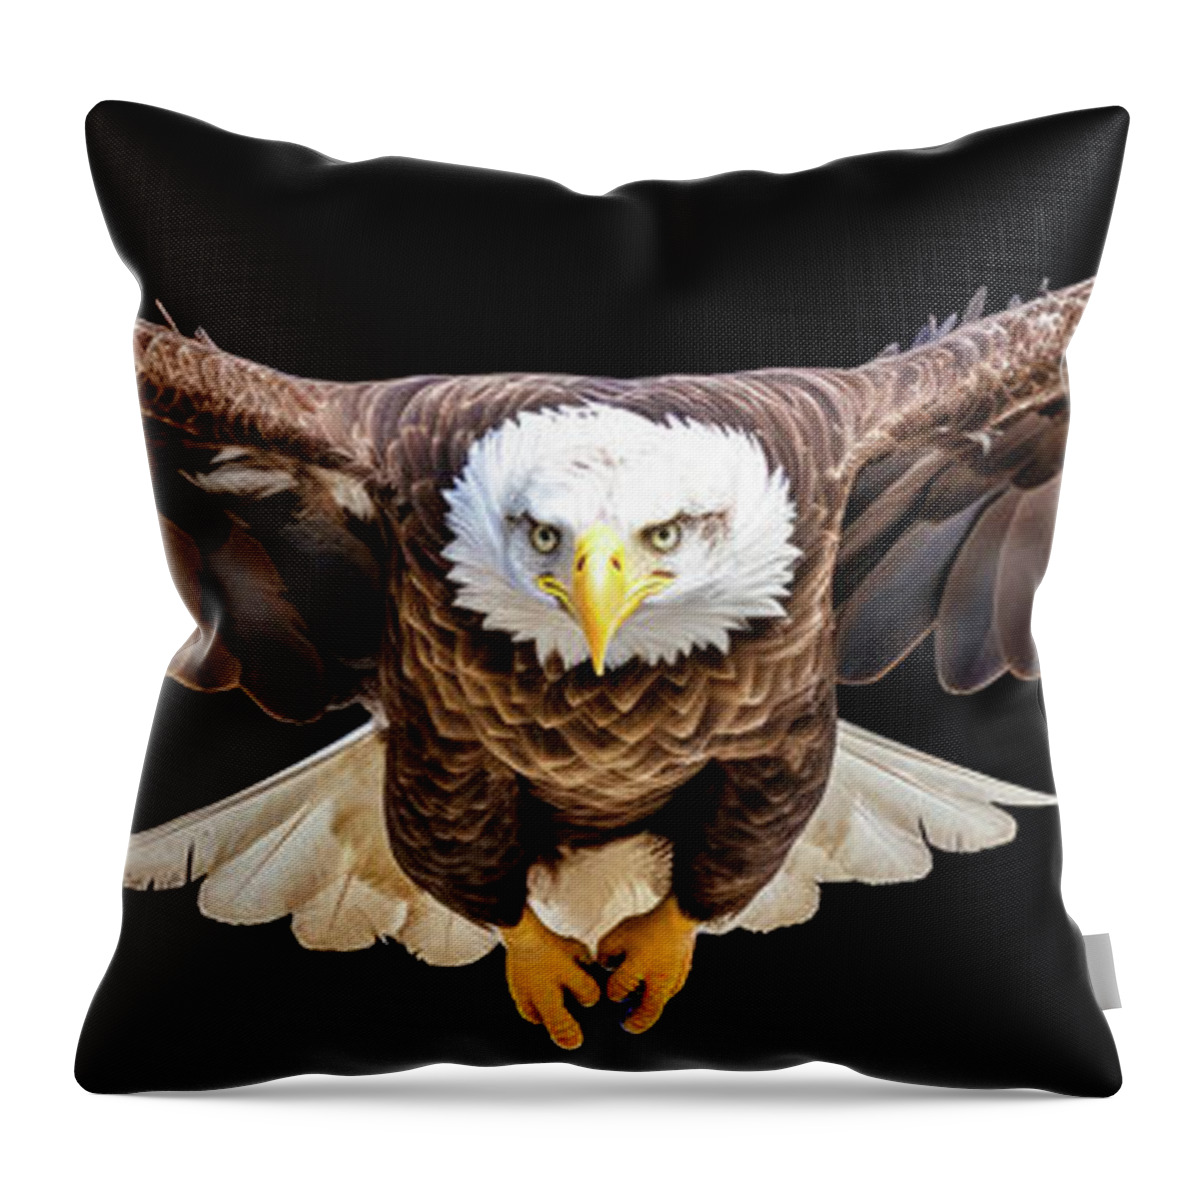 Eagle Throw Pillow featuring the digital art Eagle Flying towards you 01 by Matthias Hauser